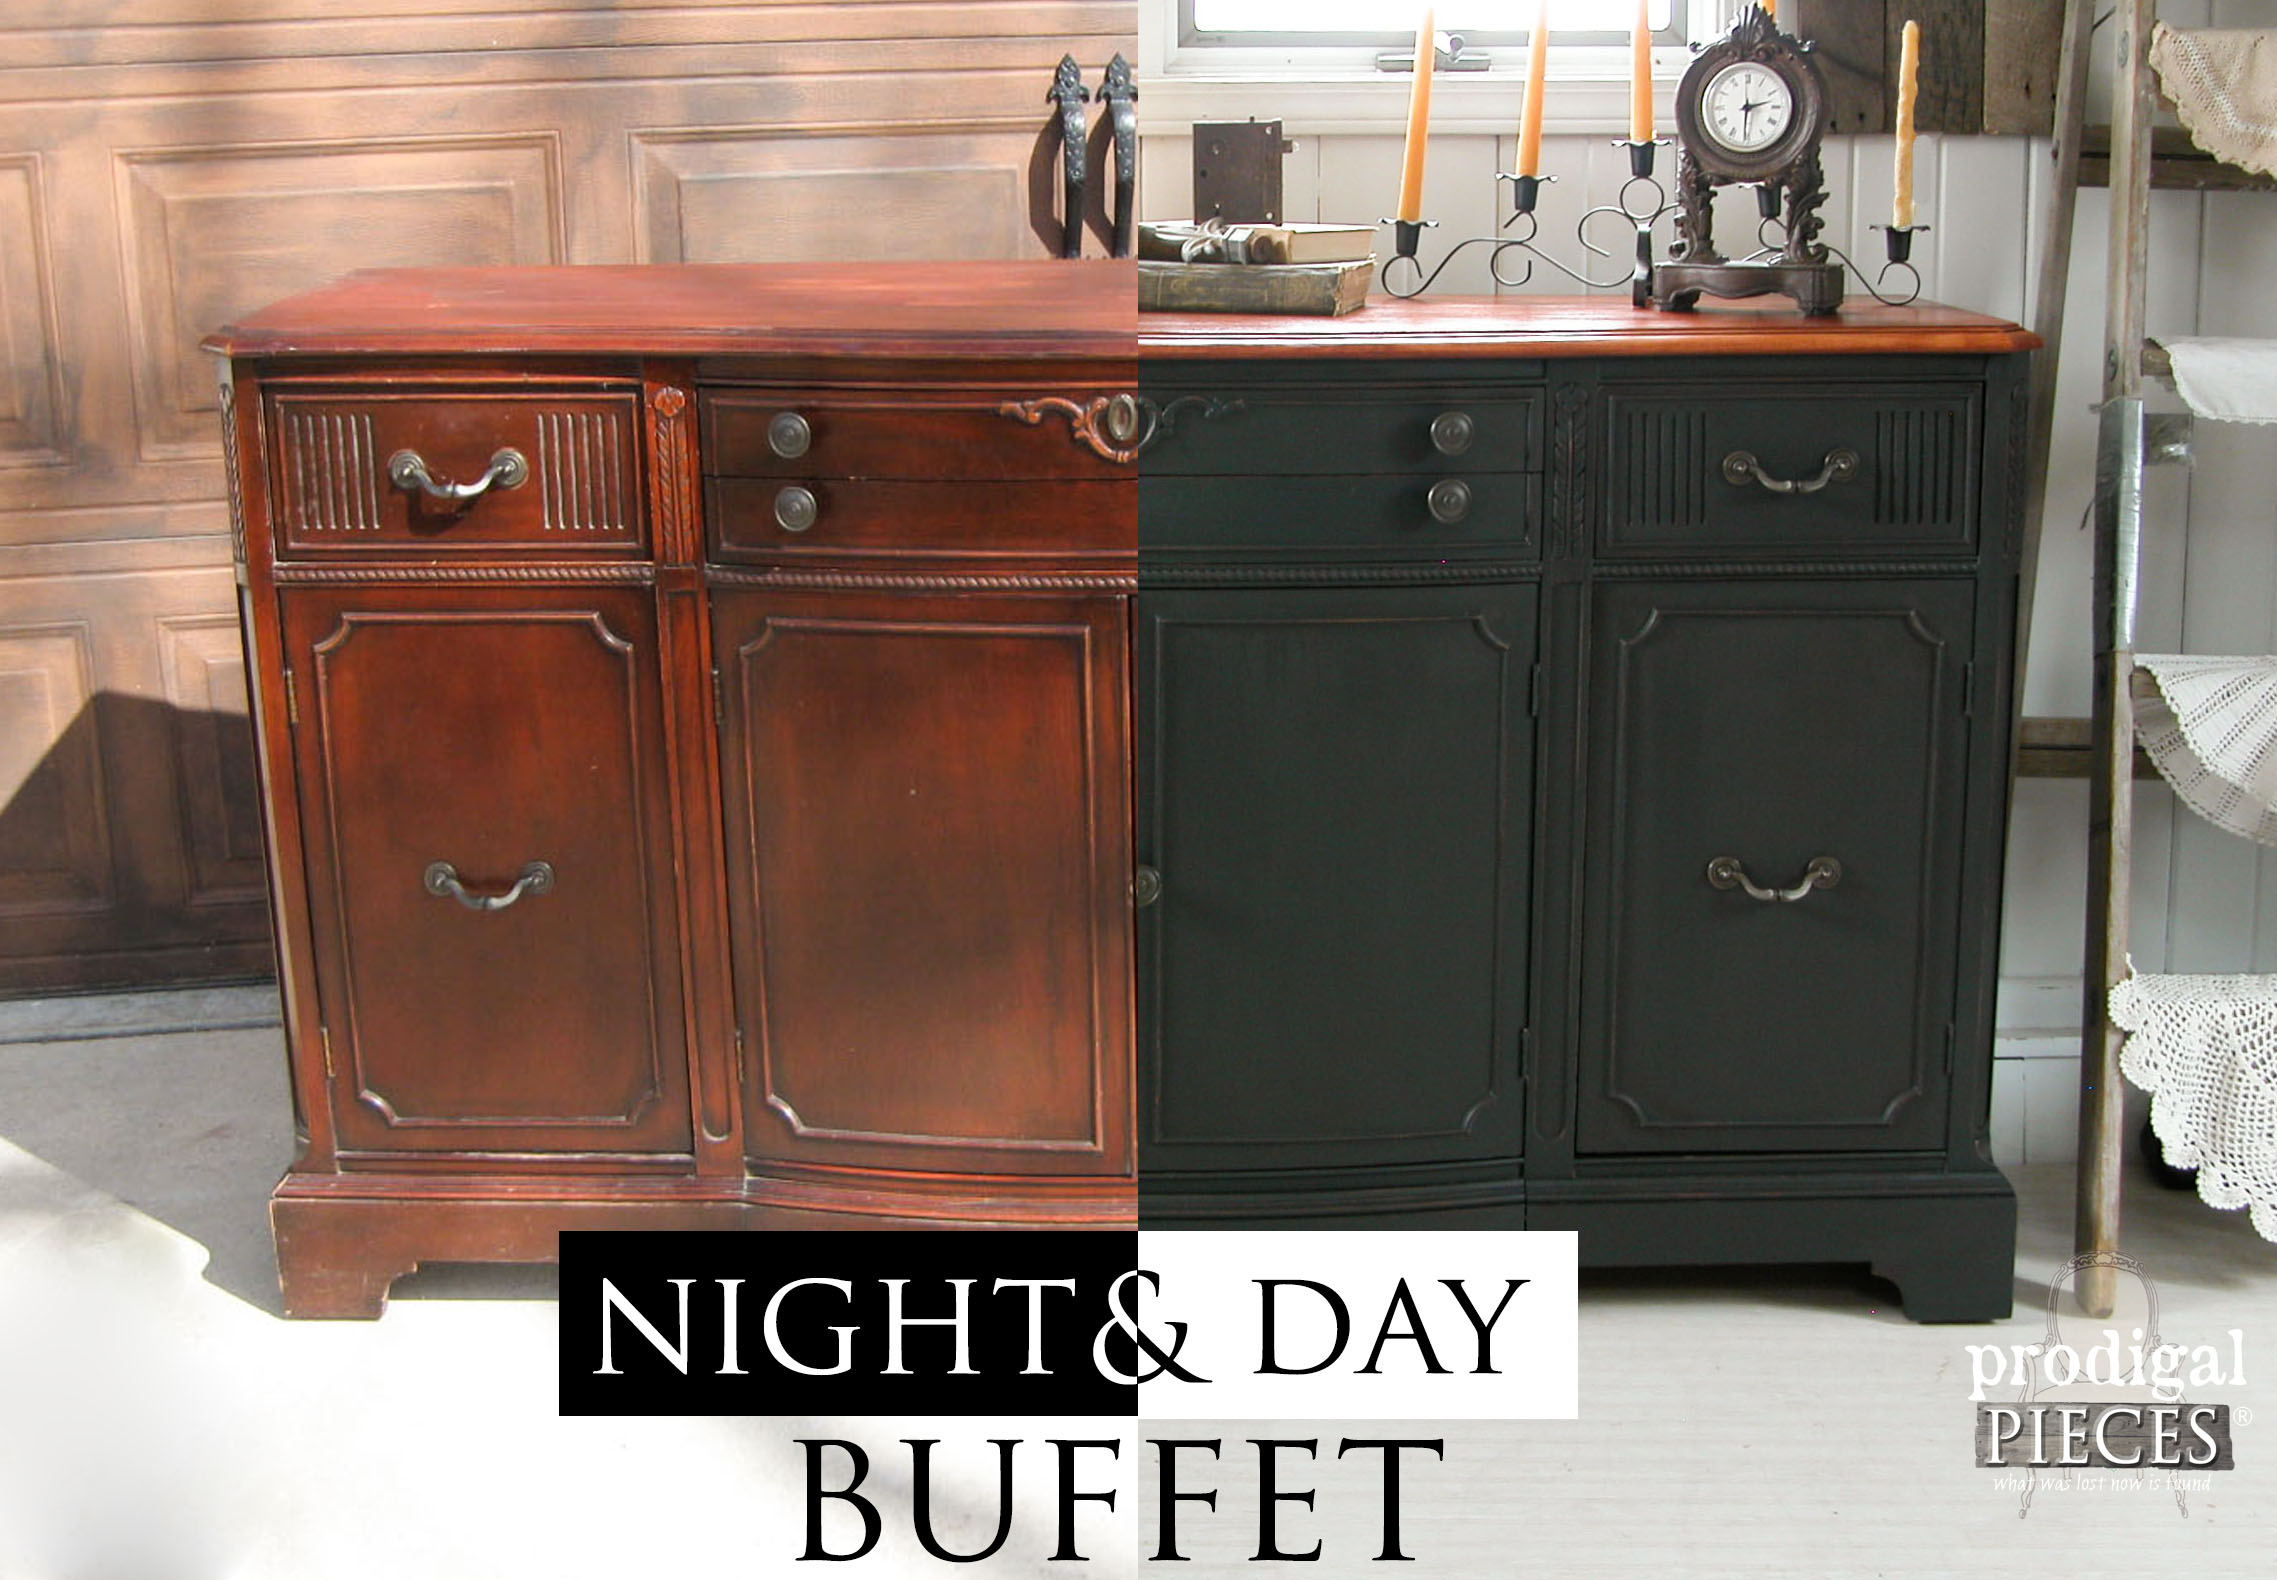 Vintage Buffet Gets Night and Day Makeover by Prodigal Pieces | www.prodigalpieces.com